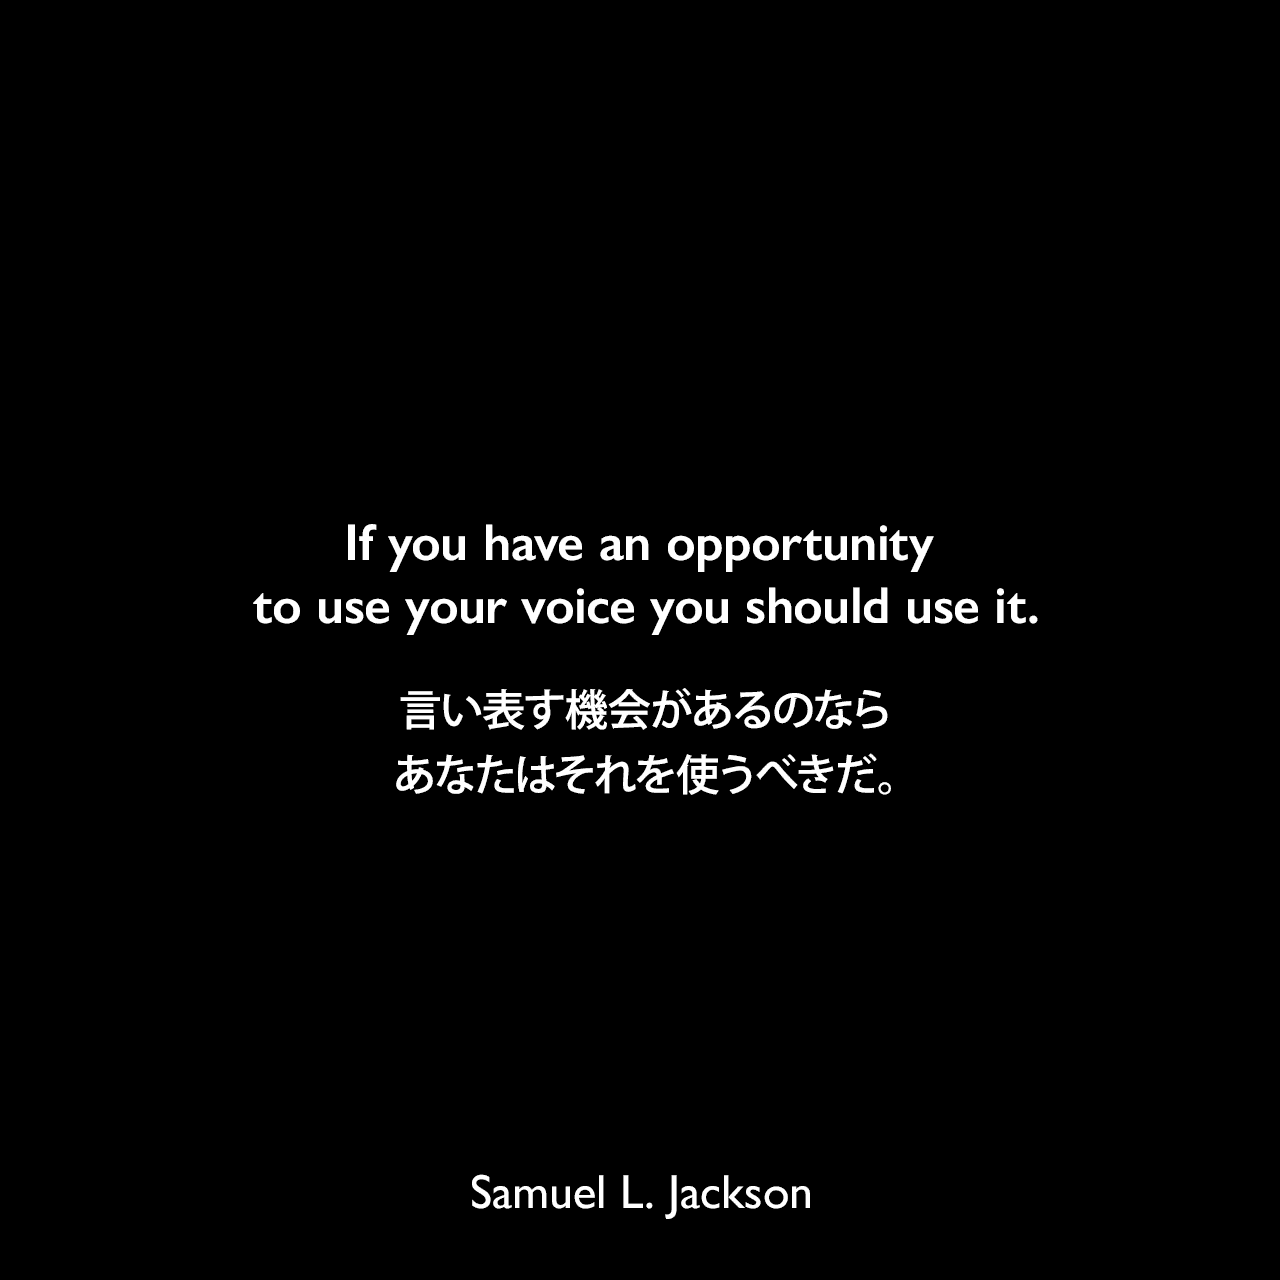 If you have an opportunity to use your voice you should use it.言い表す機会があるのなら、あなたはそれを使うべきだ。Samuel Leroy Jackson